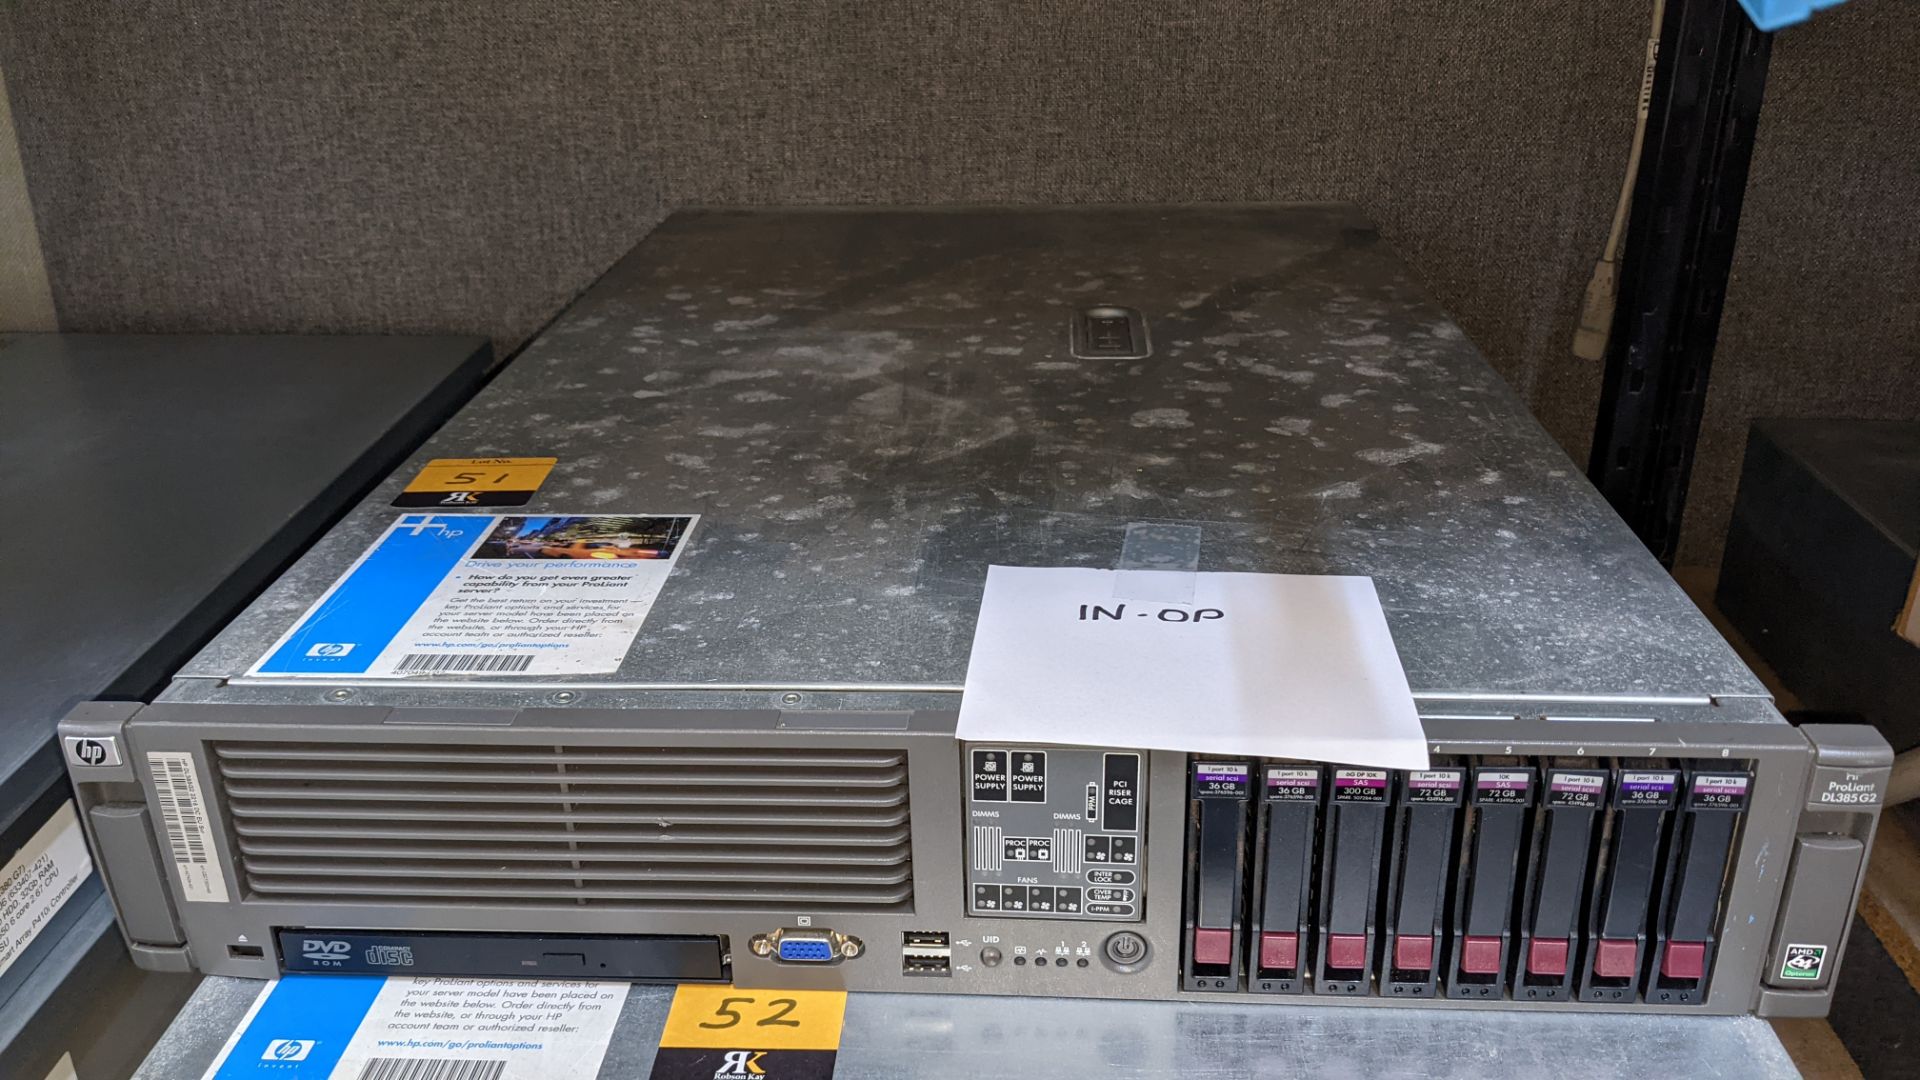 HP DL385 G2 server - understood to be only fit for use as spares, understood to have 2 off CPUs, und